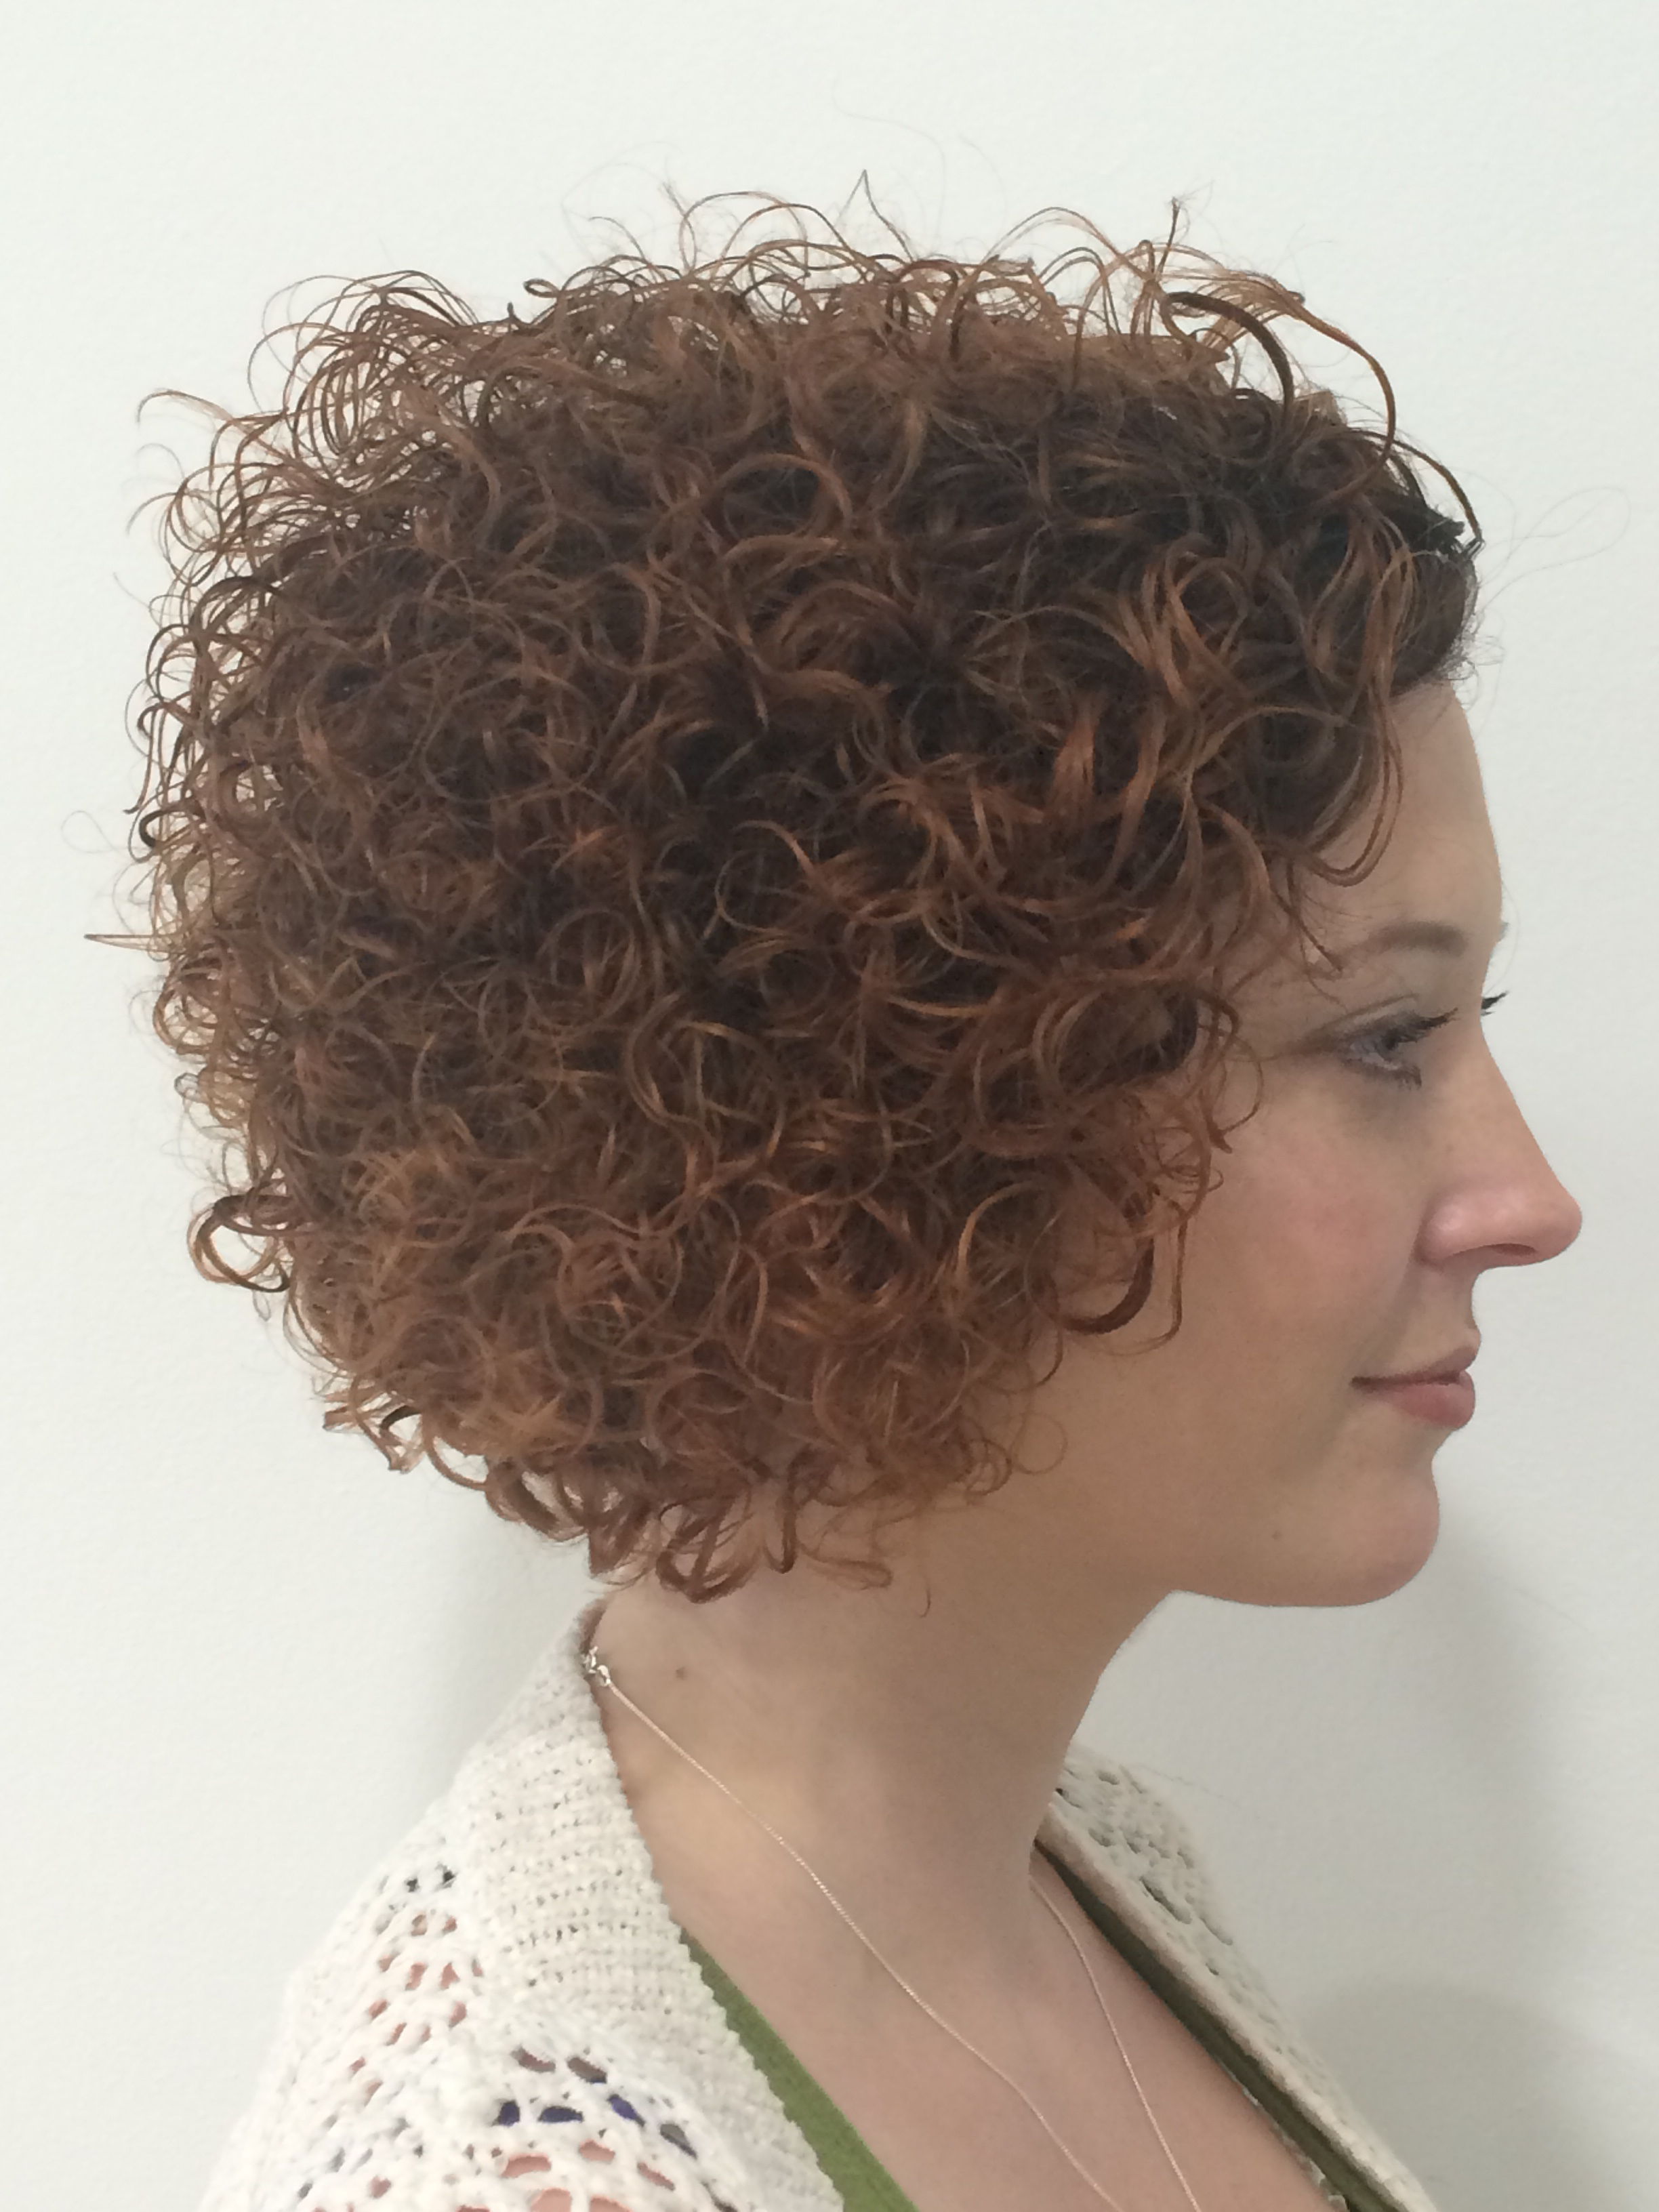 Perm Story Part 3 - How to Perm Hair by Matt Comber - MHD